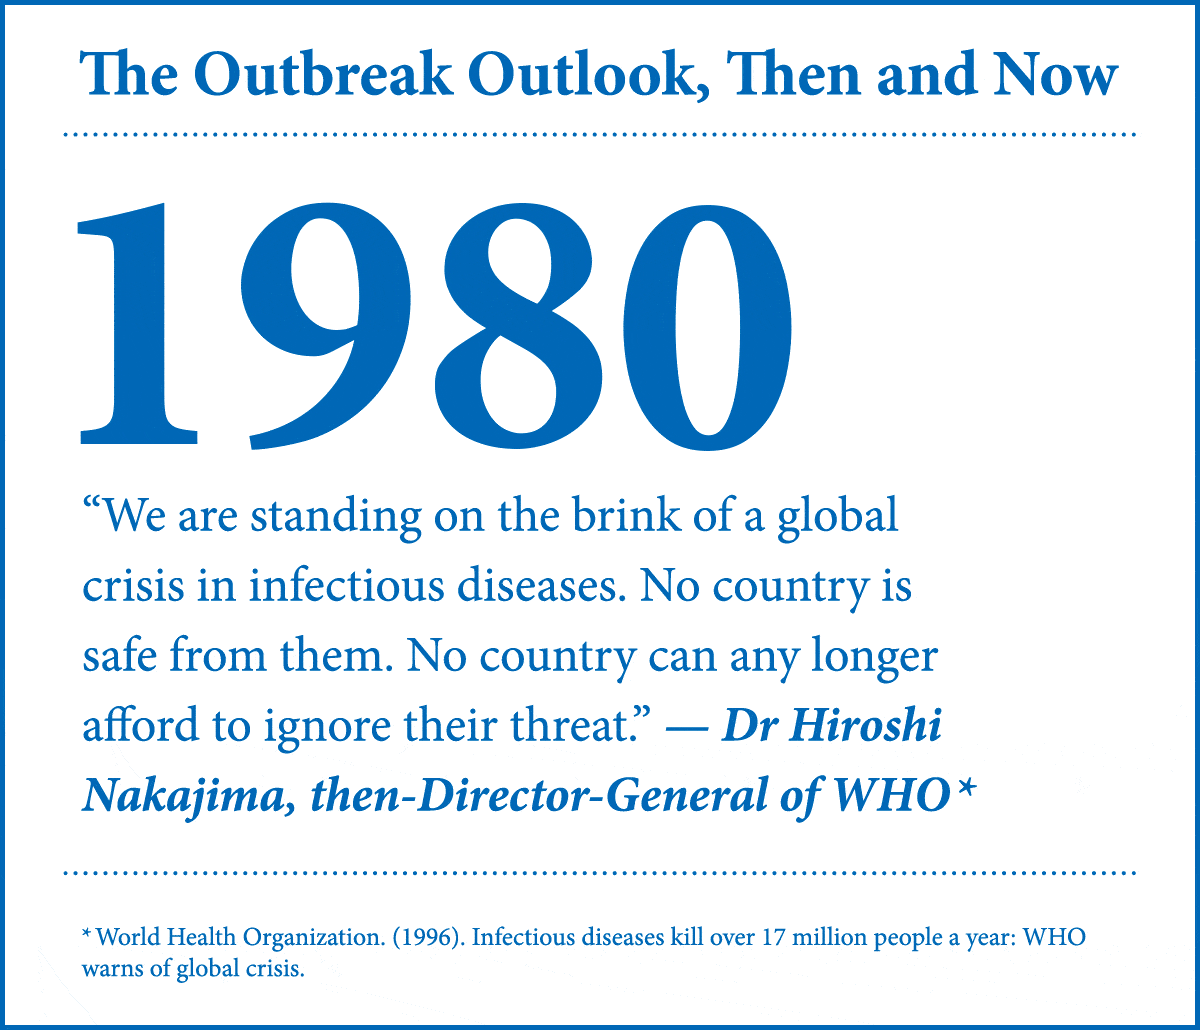 the outbreak outlook